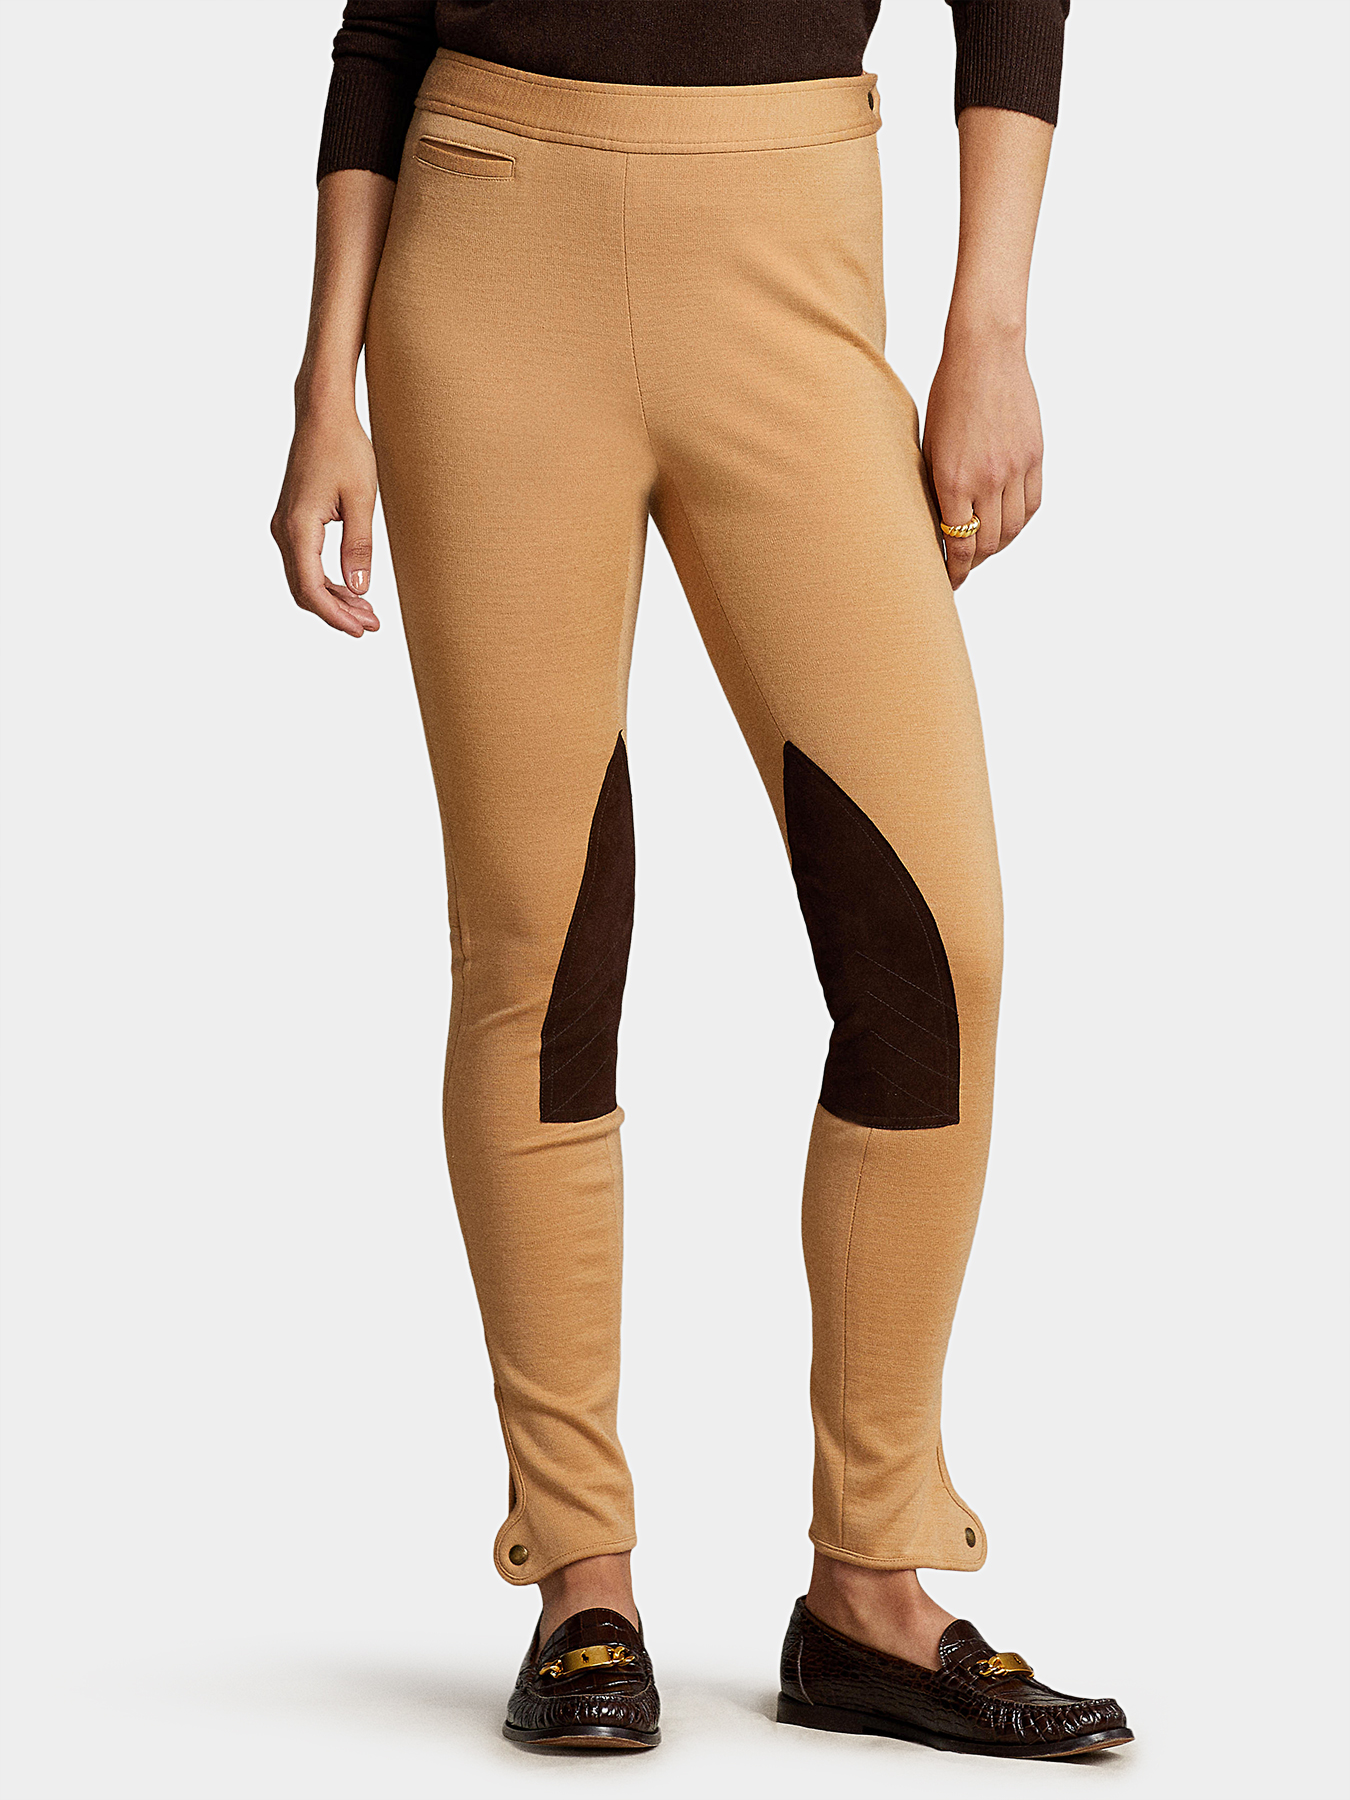 Beige leggings with patches brand POLO RALPH LAUREN